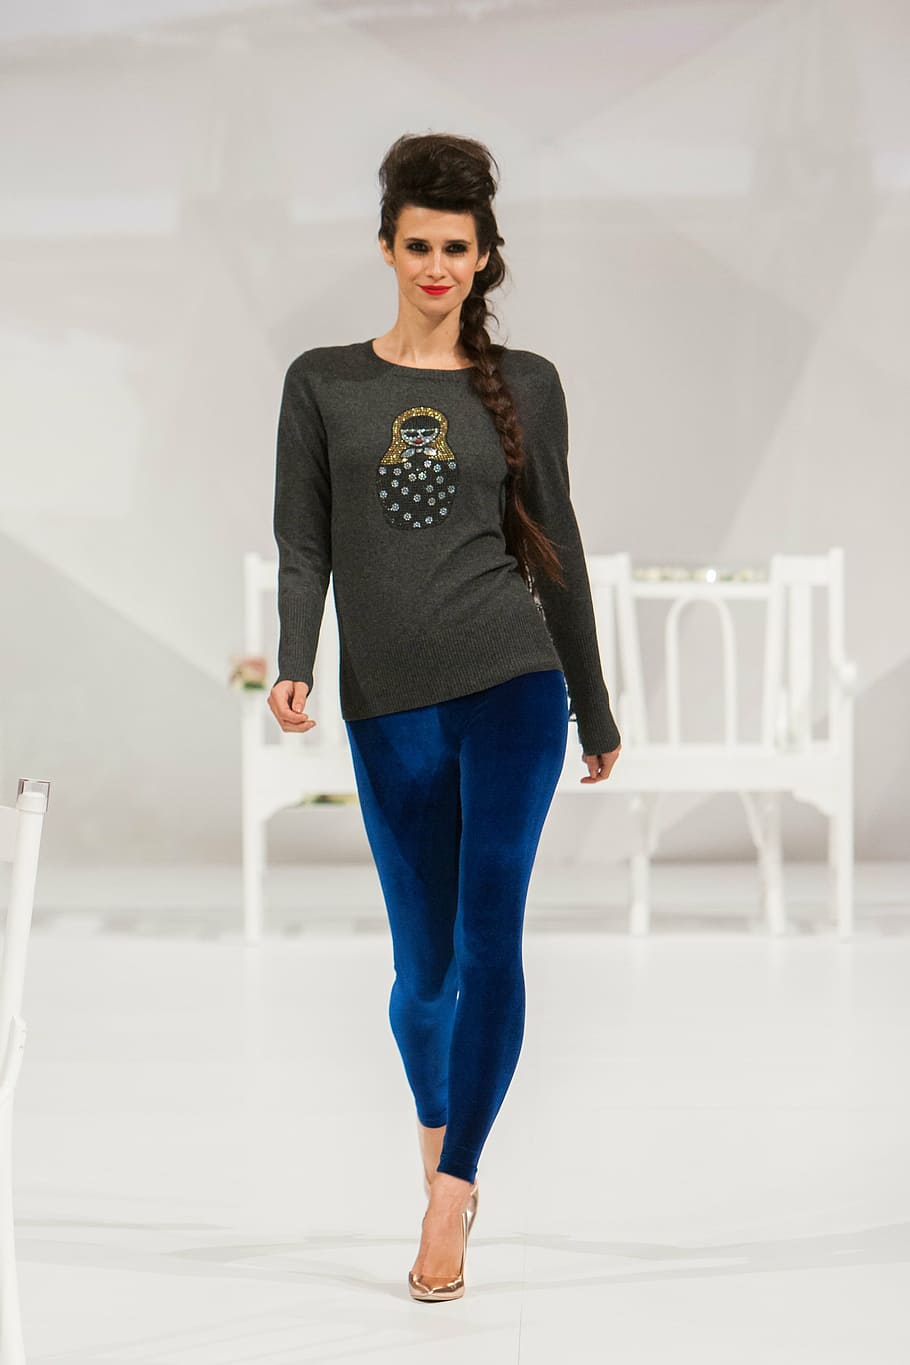 women's gray long-sleeved shirt and blue pants indoor, fashion show